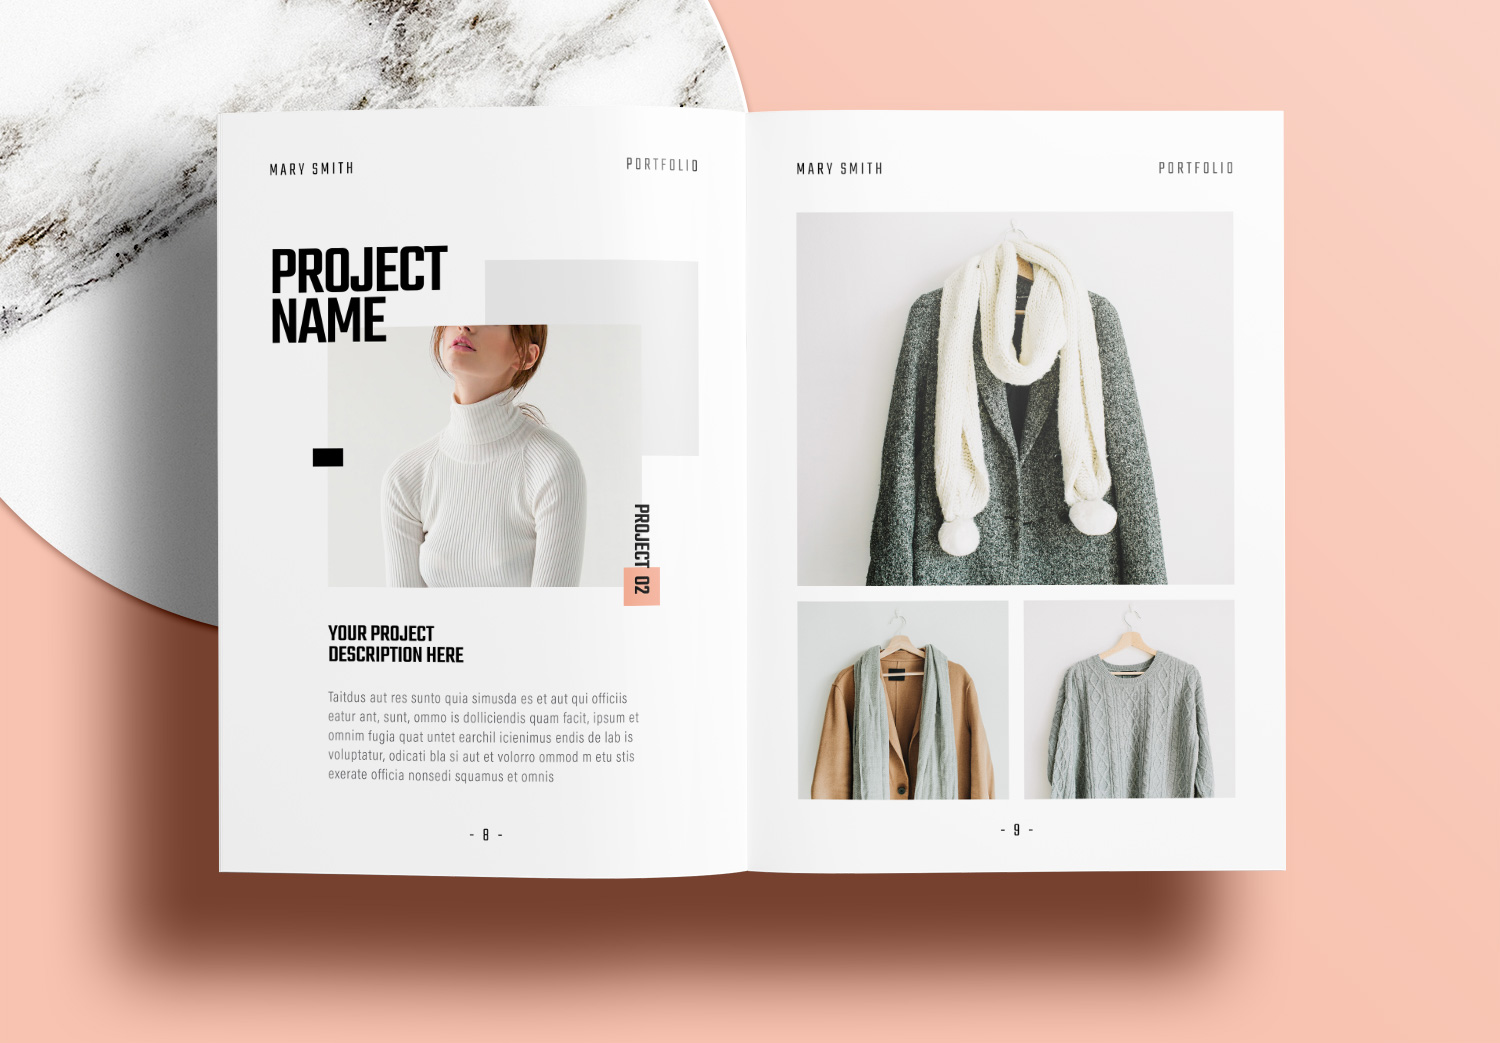 Free InDesign Portfolio Layout Templates with Pink Accents